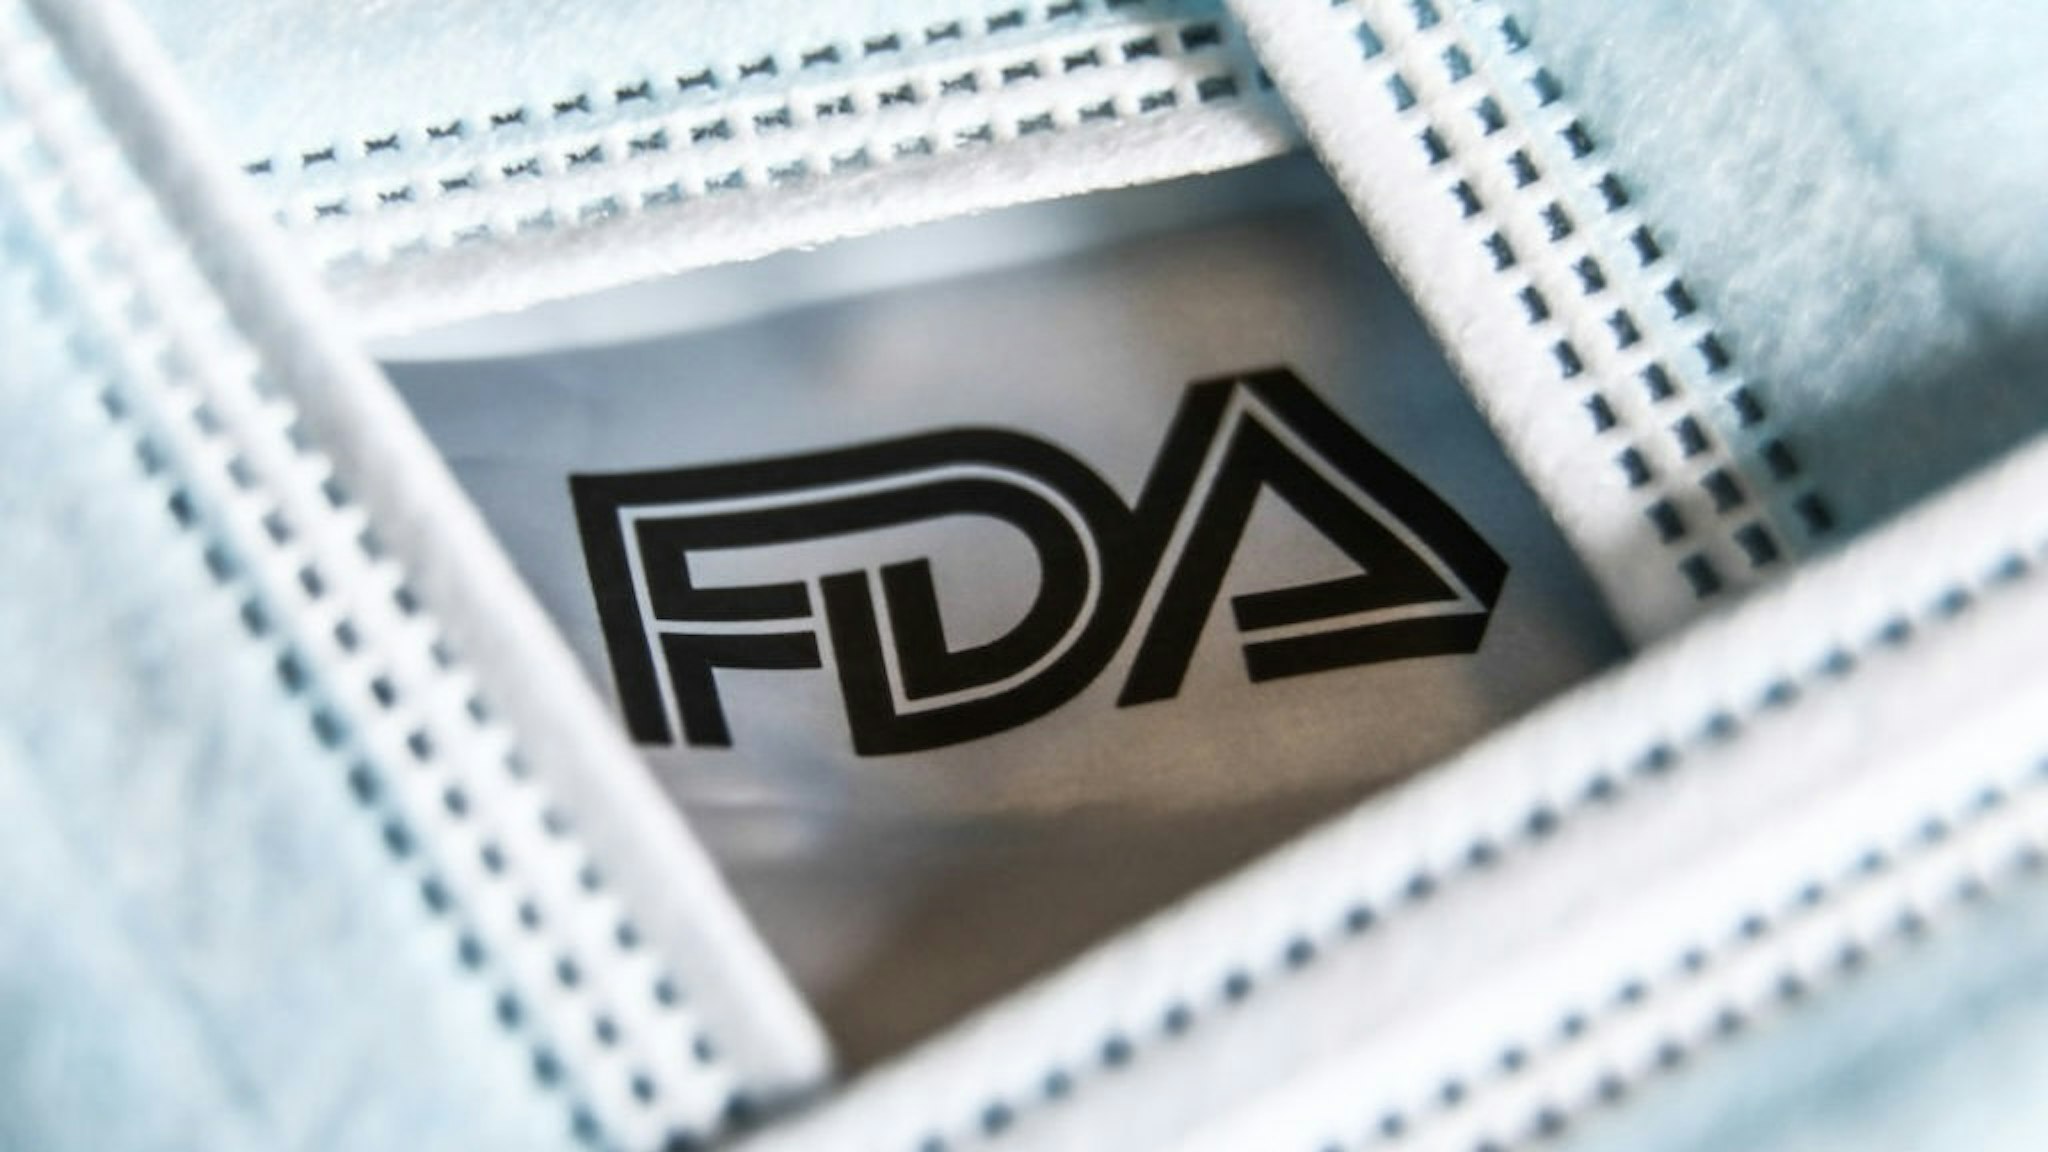 A top FDA doctor apparently had mental problems and says he was taken away against his will